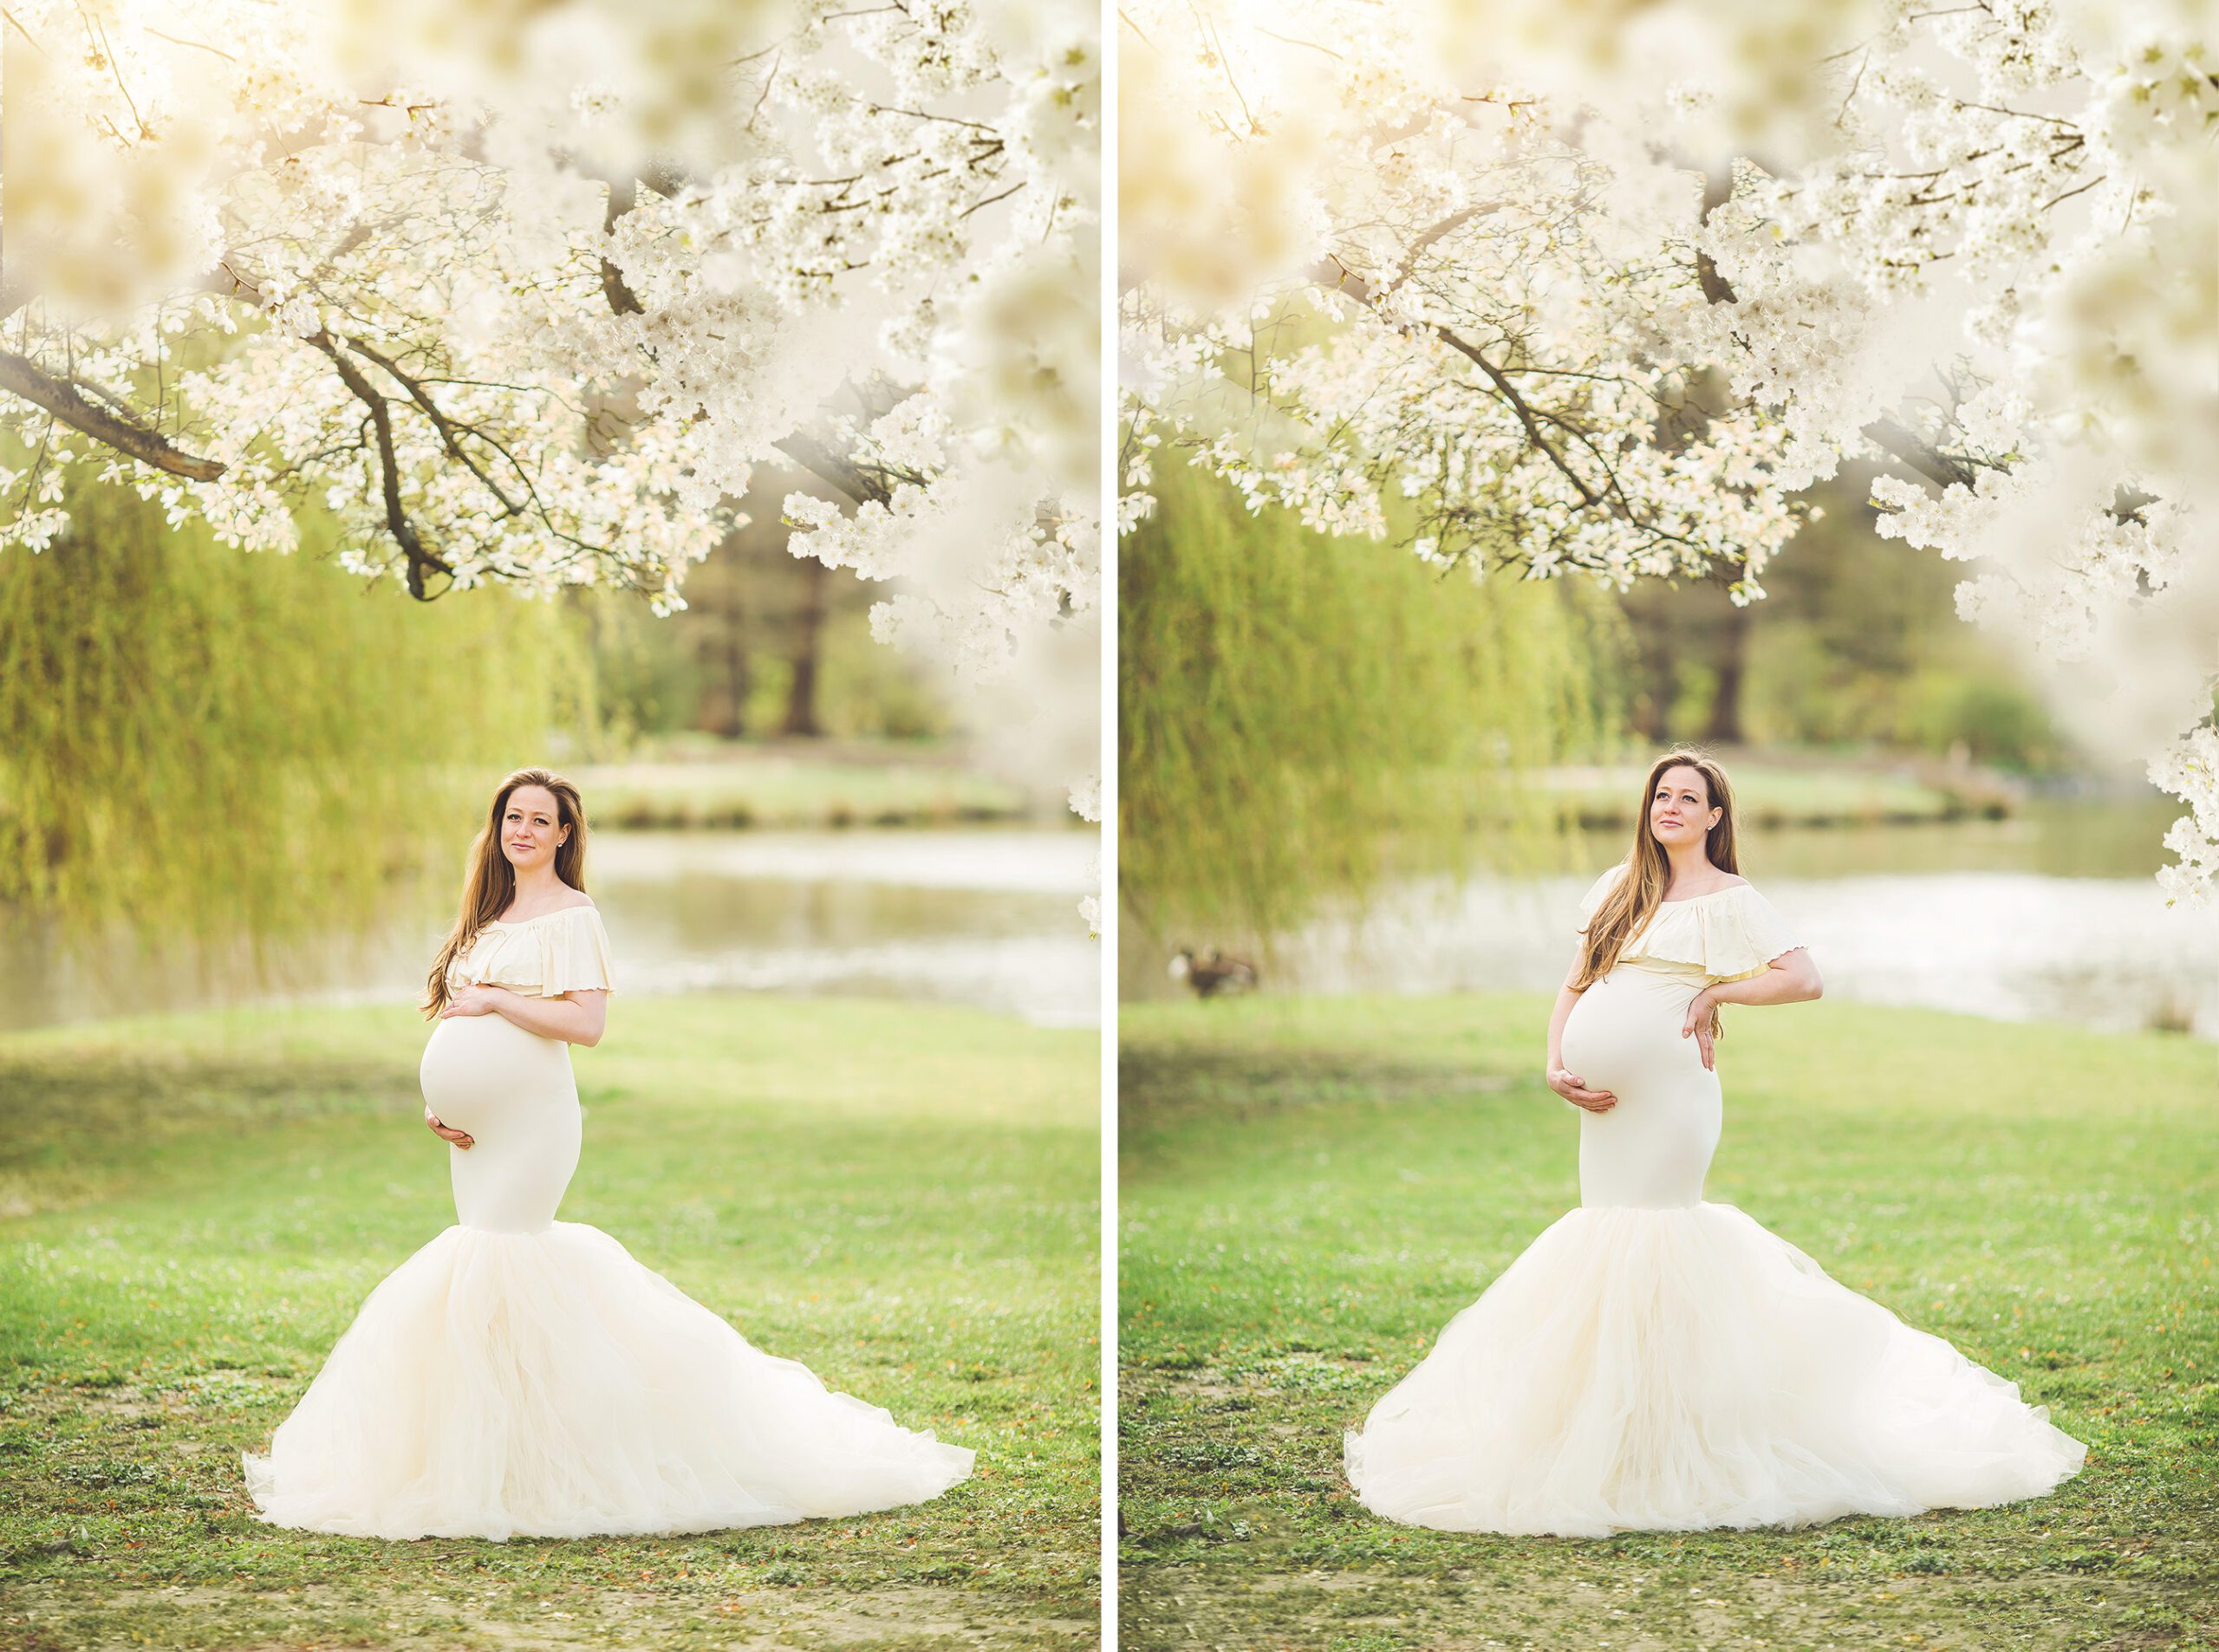 Bad Homburg maternity photographer captures this lovely maternity session by the lake at the Kurpark